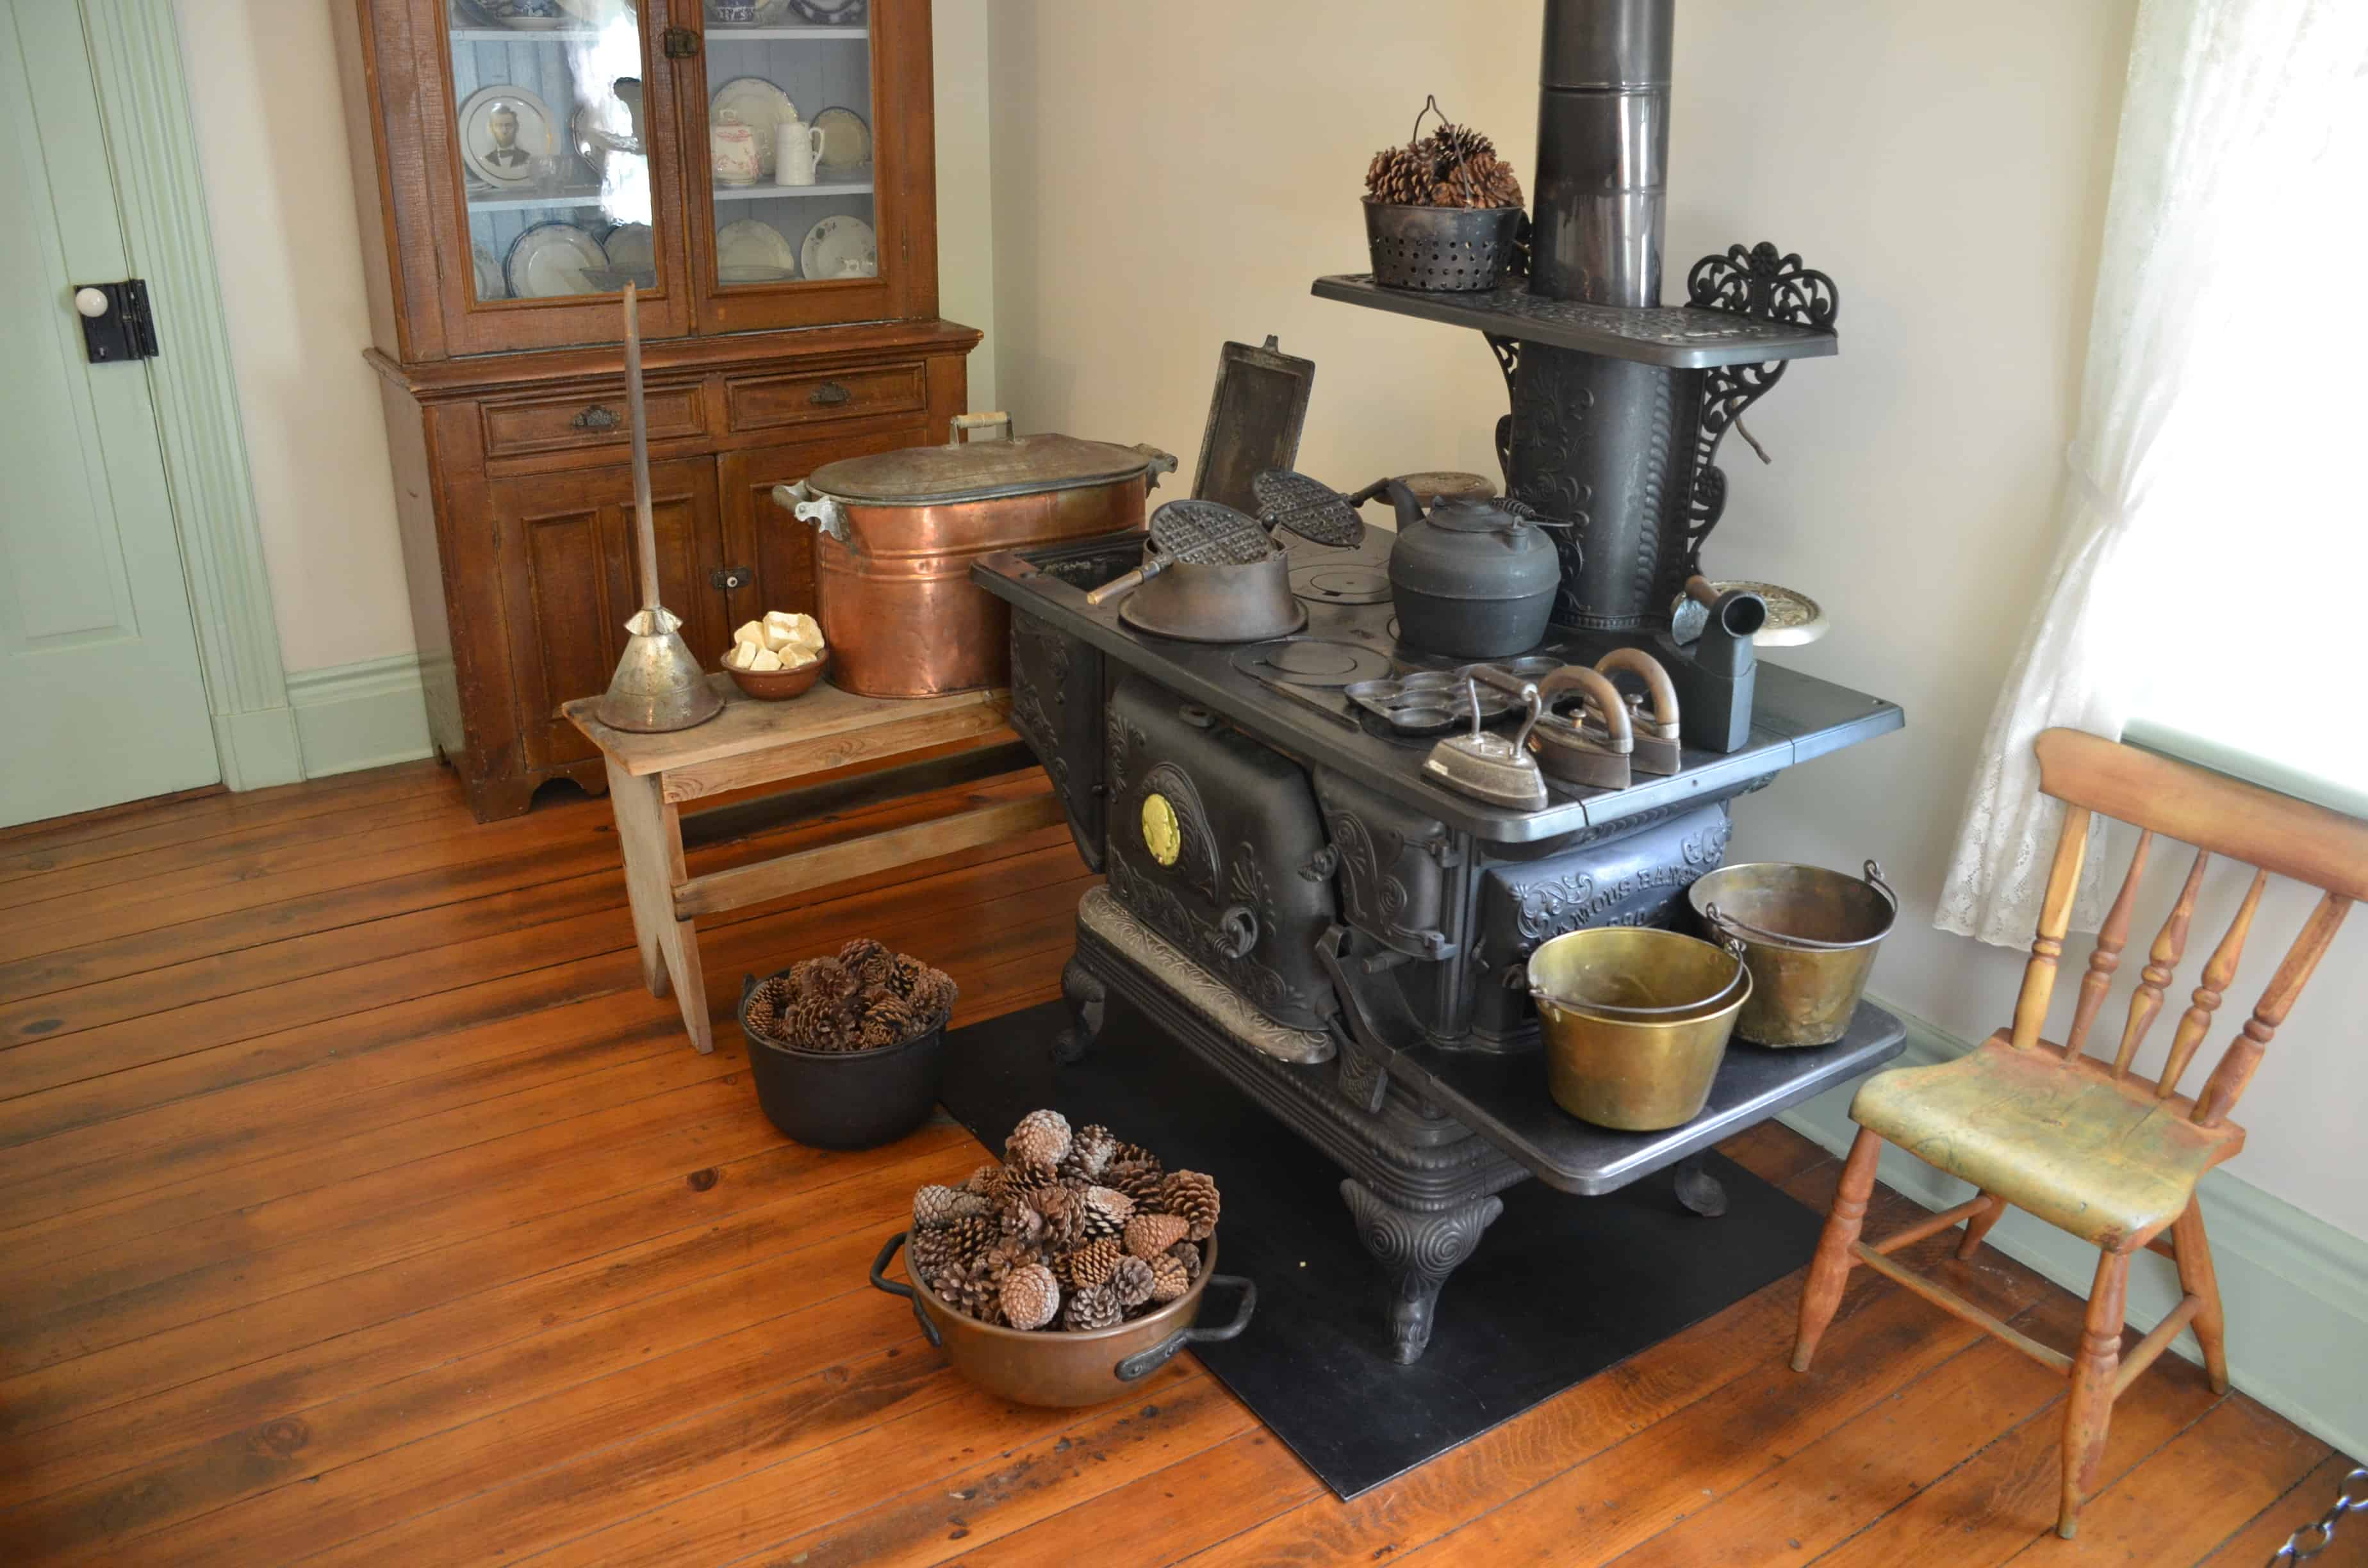 Kitchen at the Brigham Young Winter Home in St. George, Utah